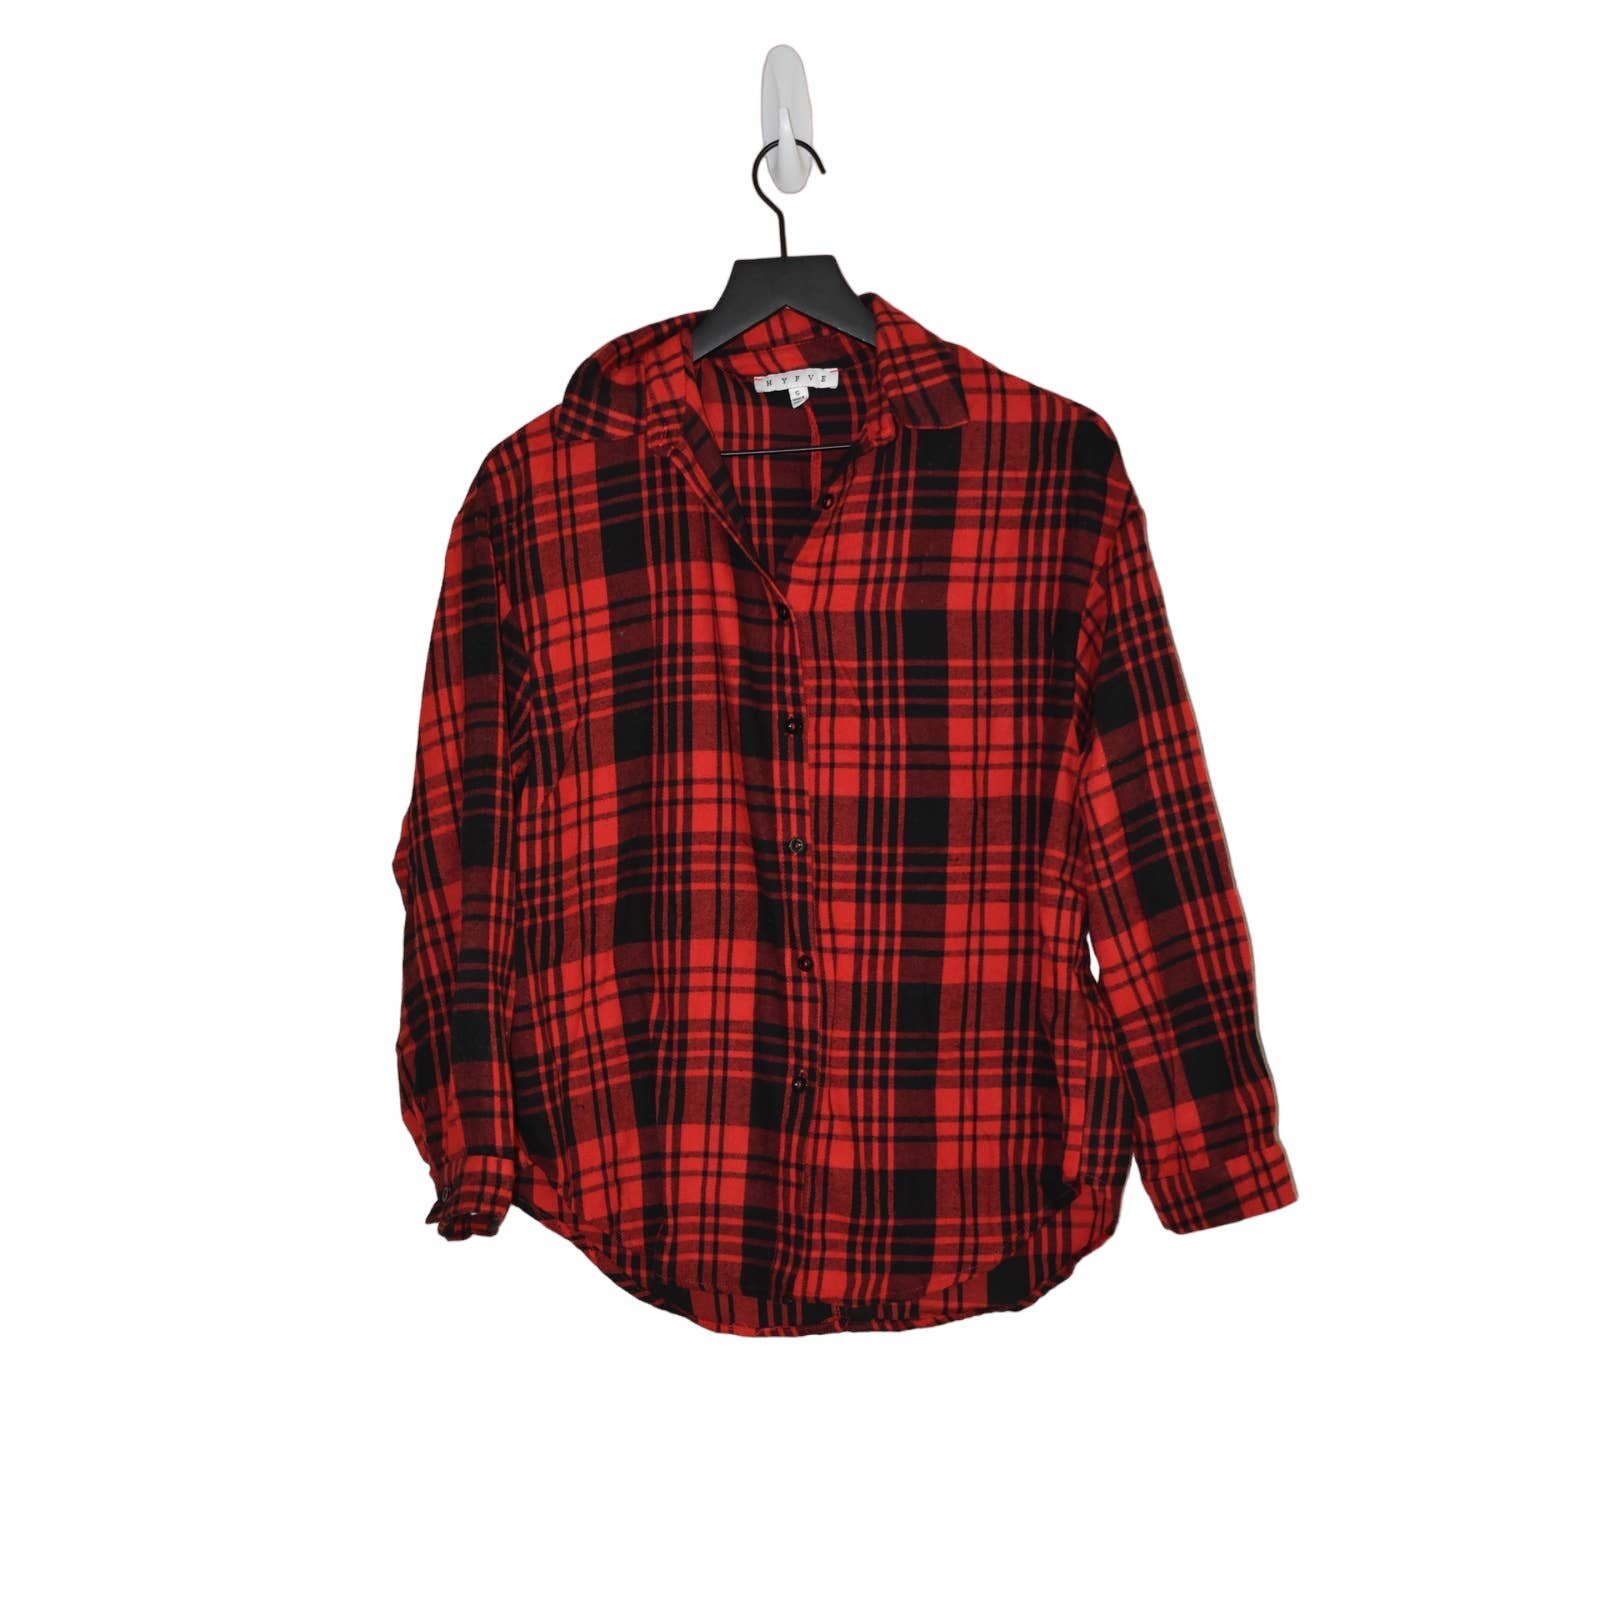 Comfortable Hyfve Red Button Down Flannel Top Size S gt